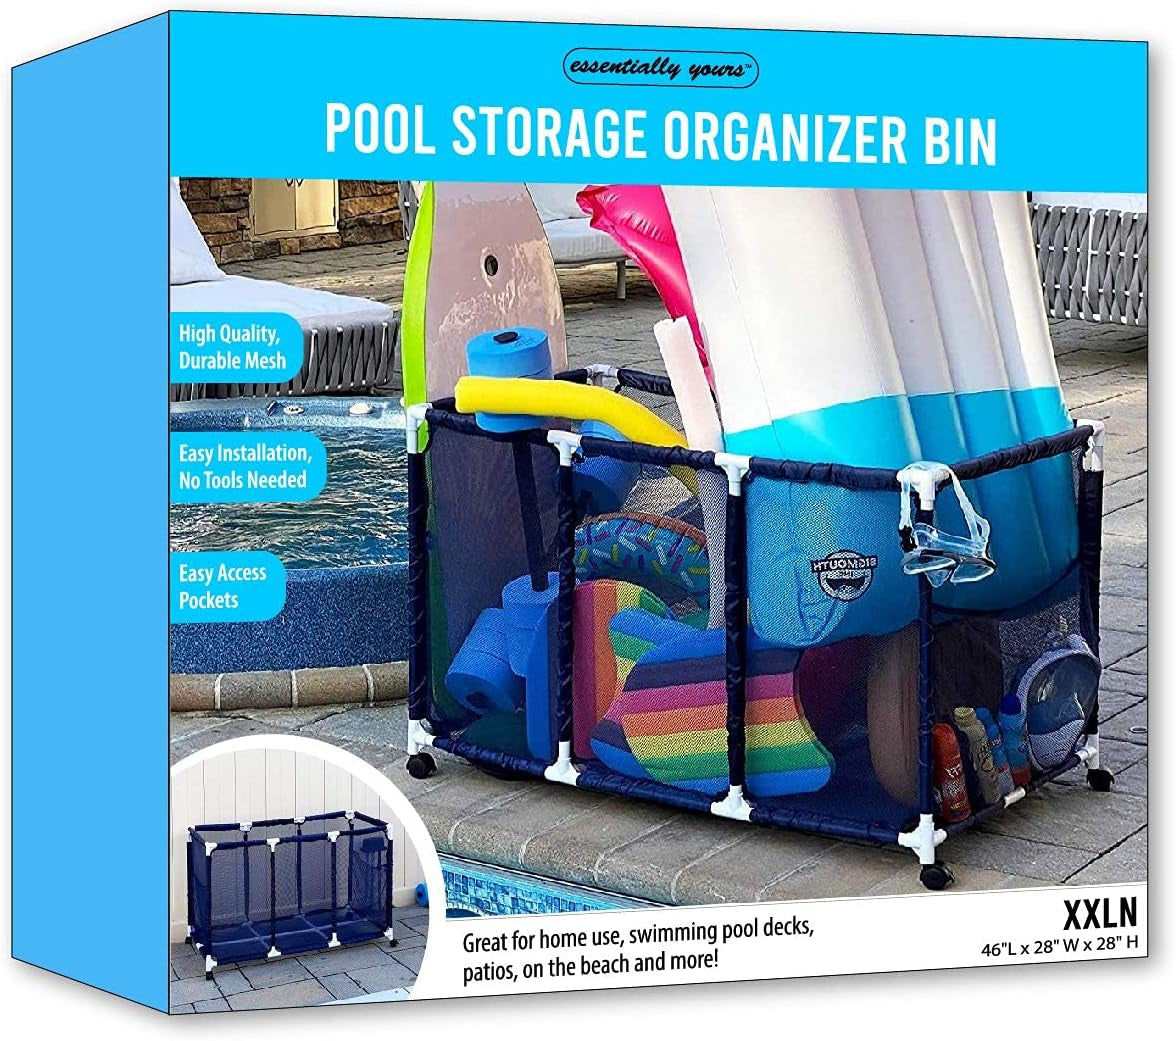 Pool Noodles Holder, Toys, Balls and Floats Equipment Mesh Rolling Storage Organizer Bin, Kids Height, Large, (43" W X 25" L X 28" H), Blue/White Style 563009